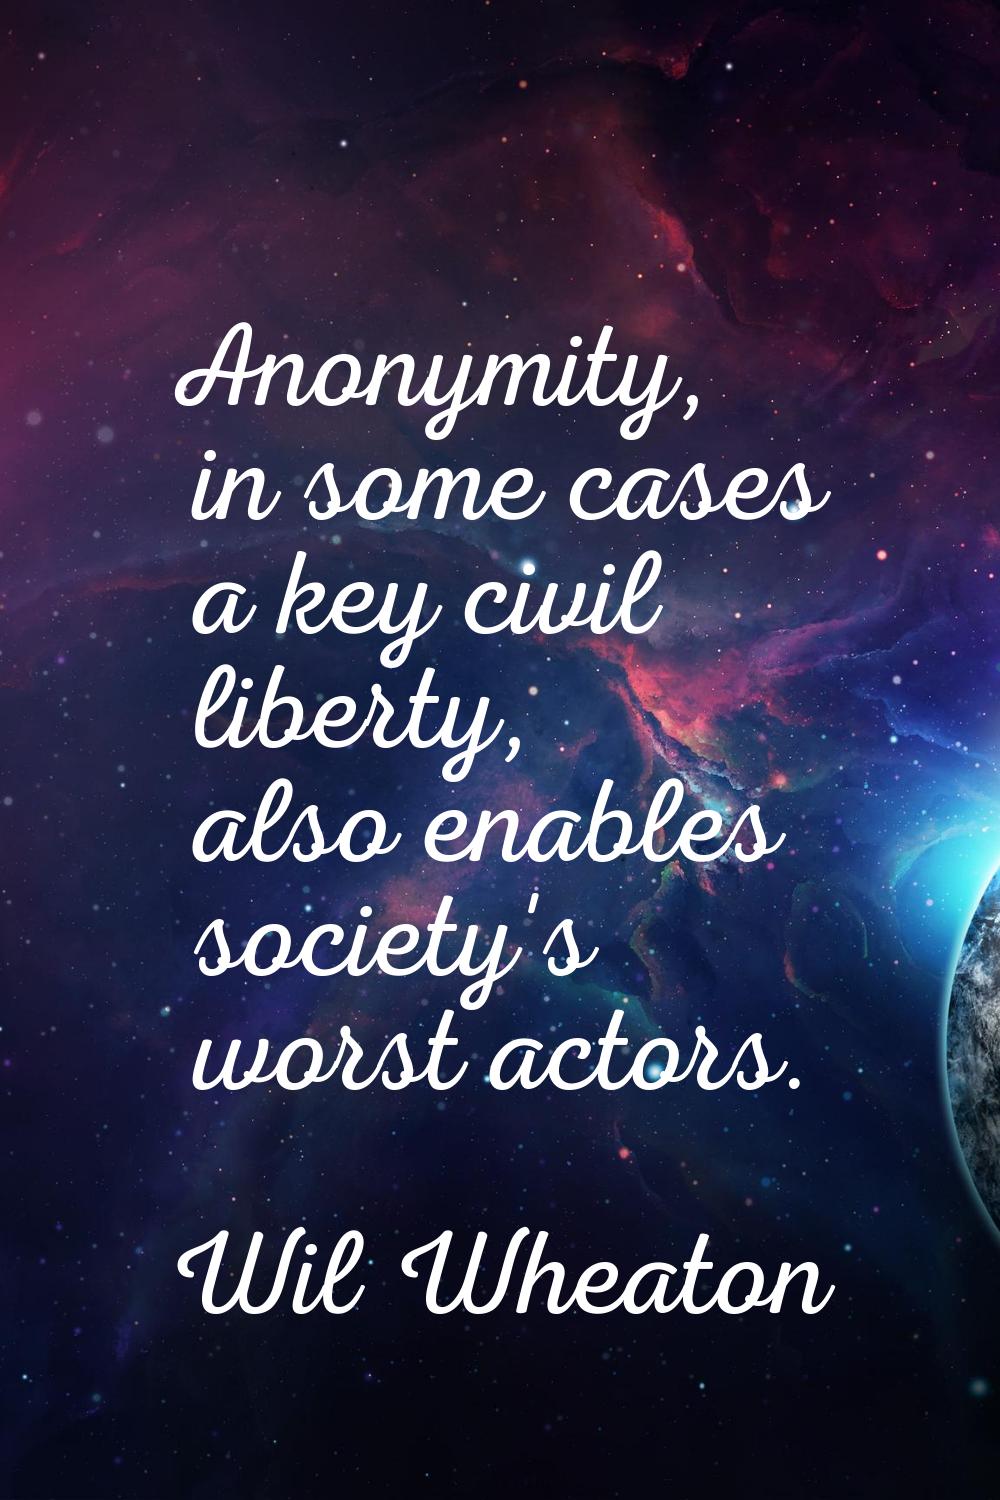 Anonymity, in some cases a key civil liberty, also enables society's worst actors.